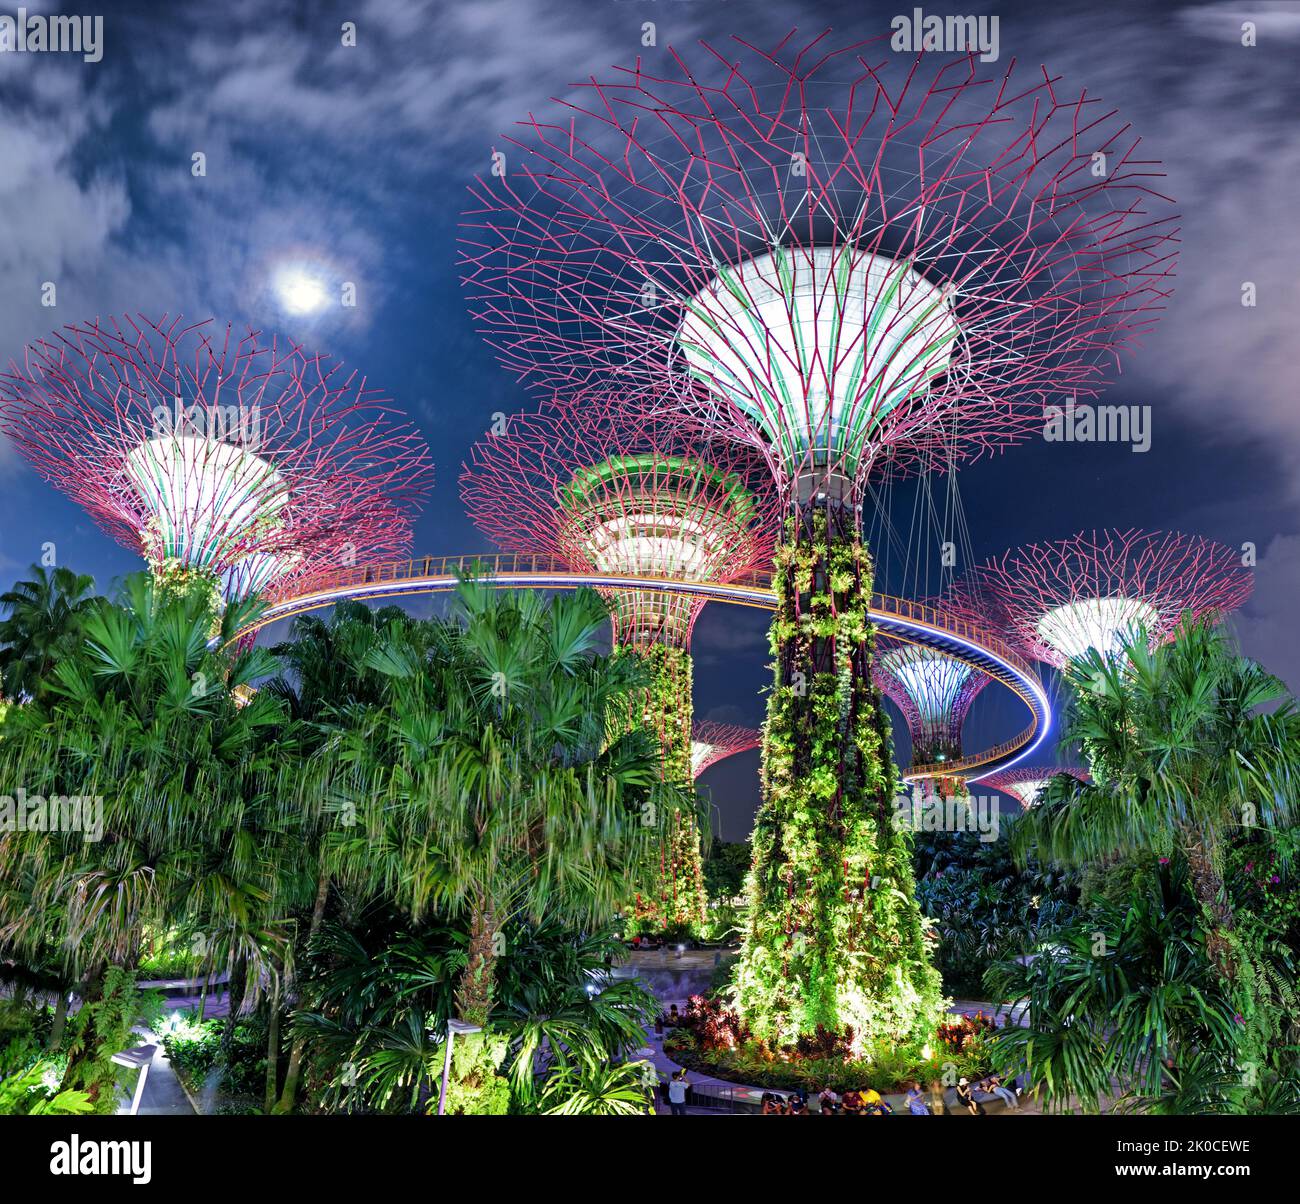 Supertree garden at night, Garden by the Bay, Singapore Stock Photo